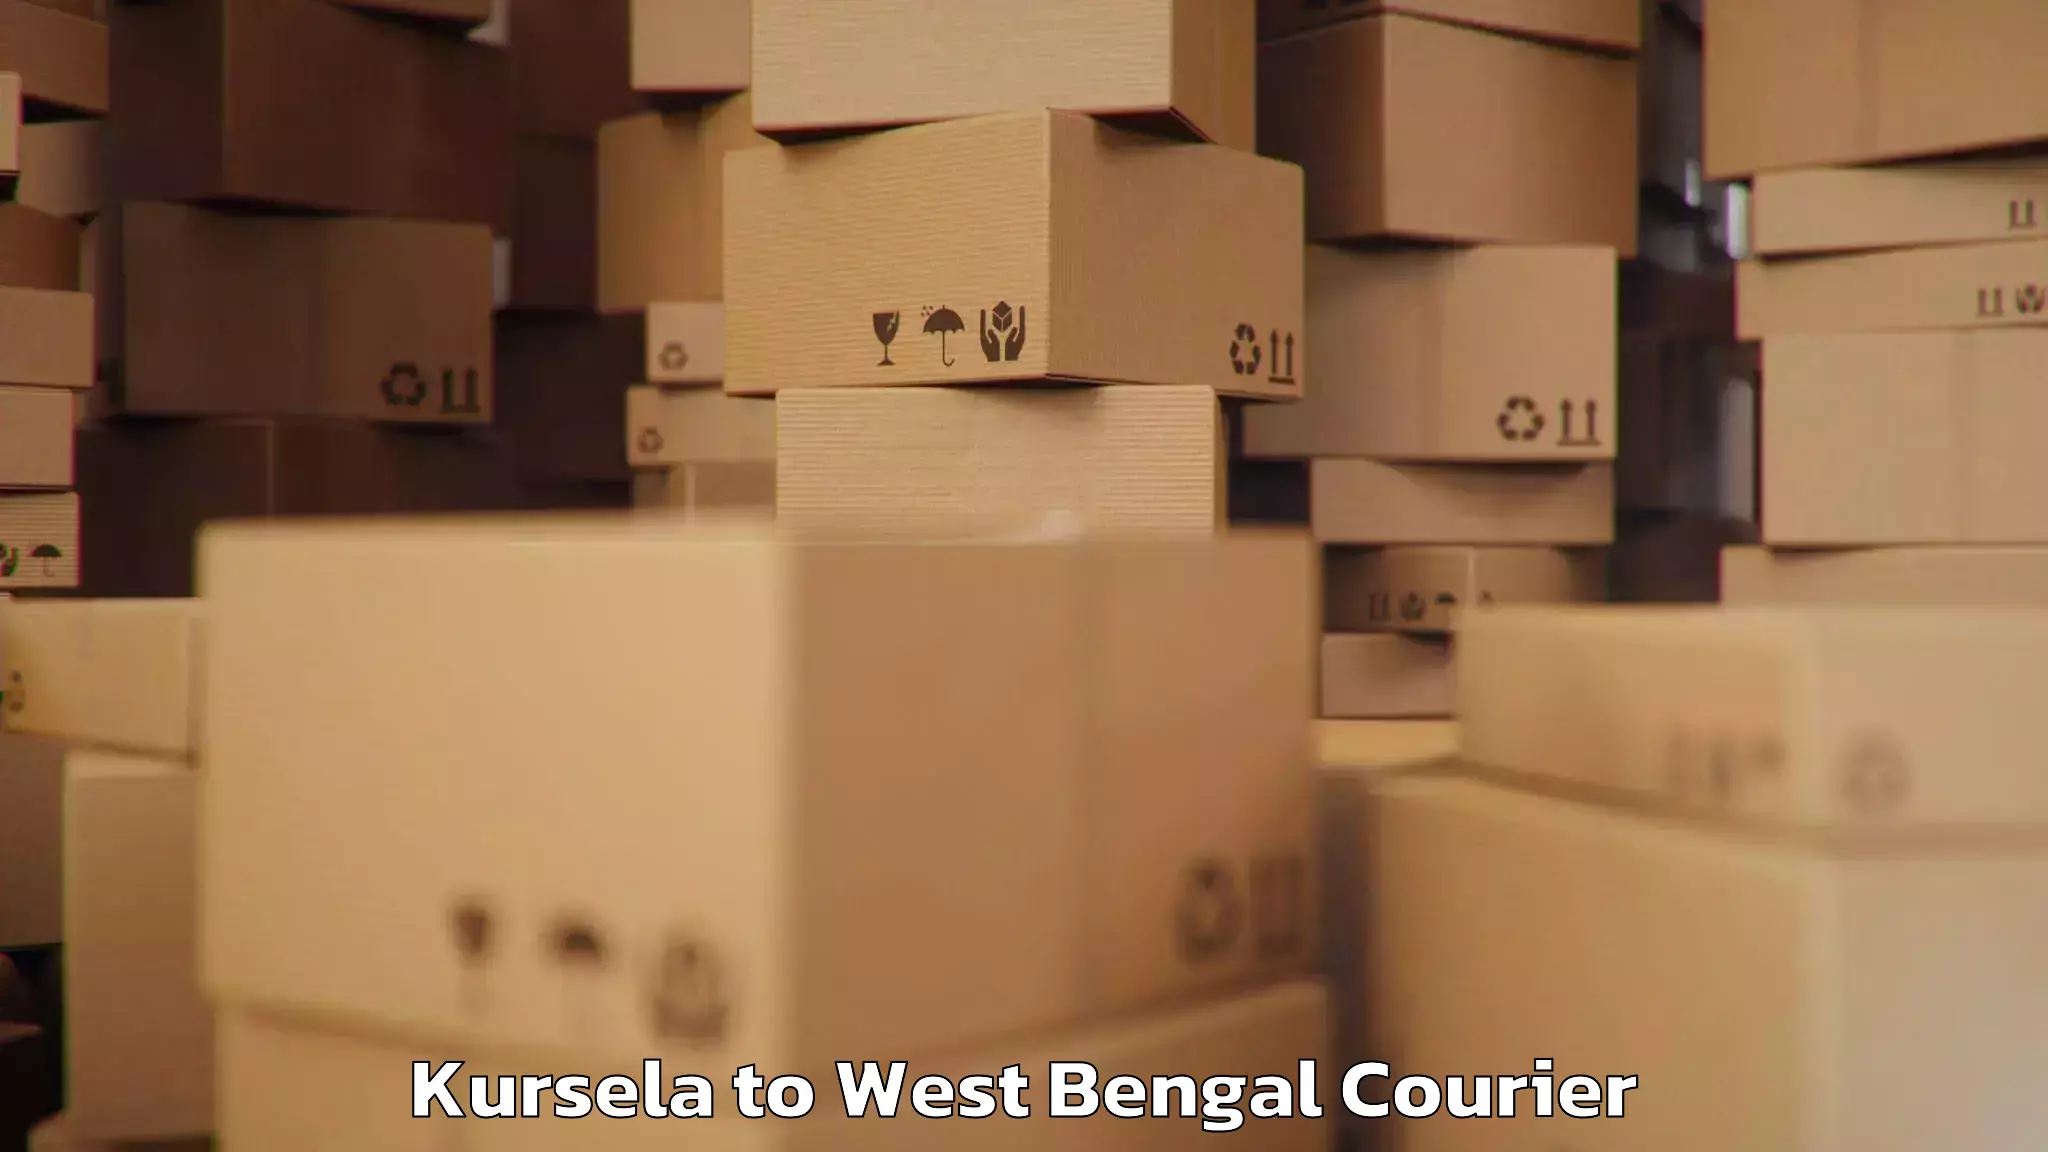 Baggage transport management in Kursela to West Bengal